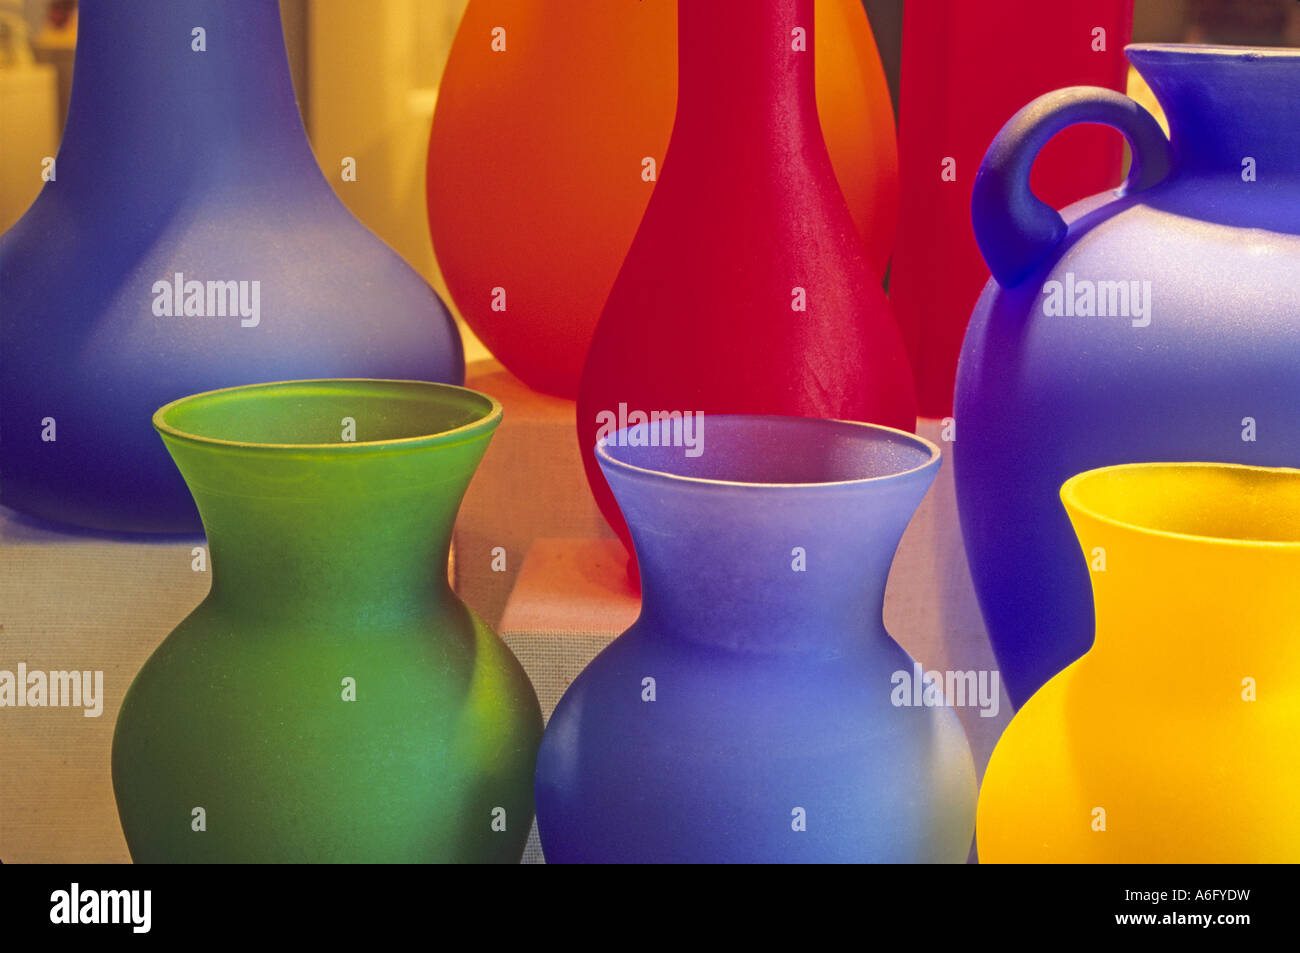 colorful glass vases Stock Photo